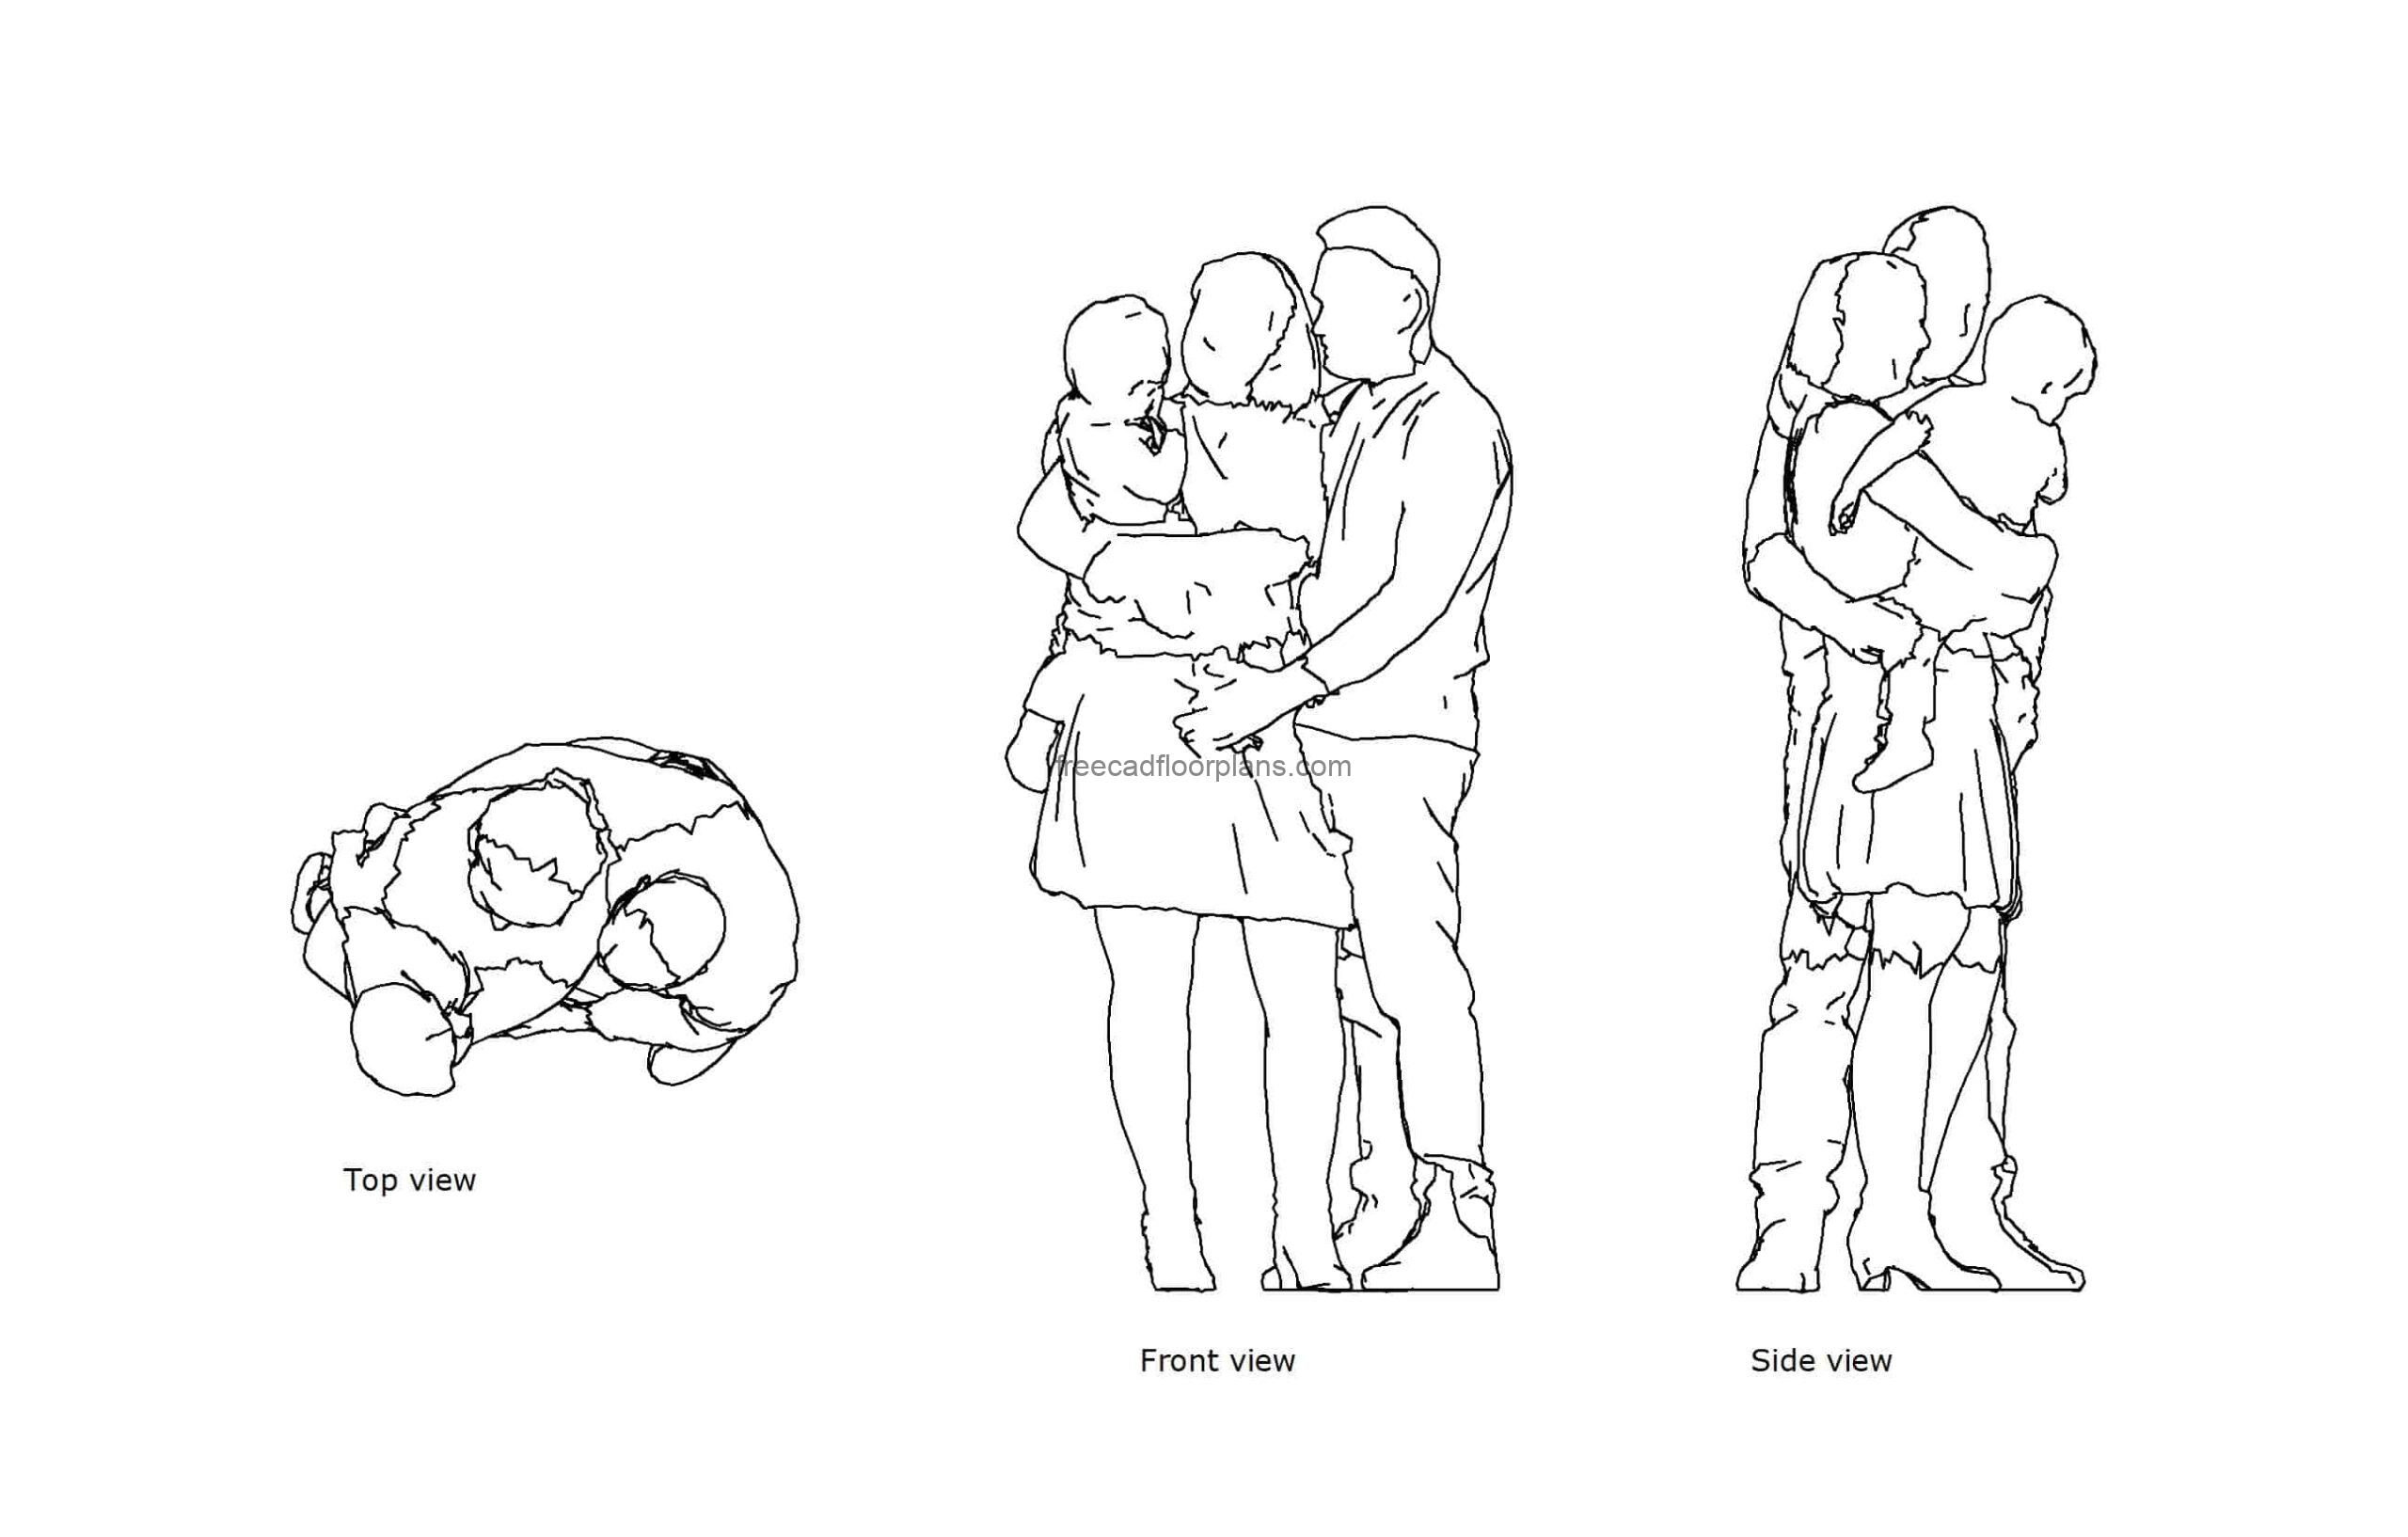 autocad drawing of a family together, plan and elevation 2d views, dwg file free for download